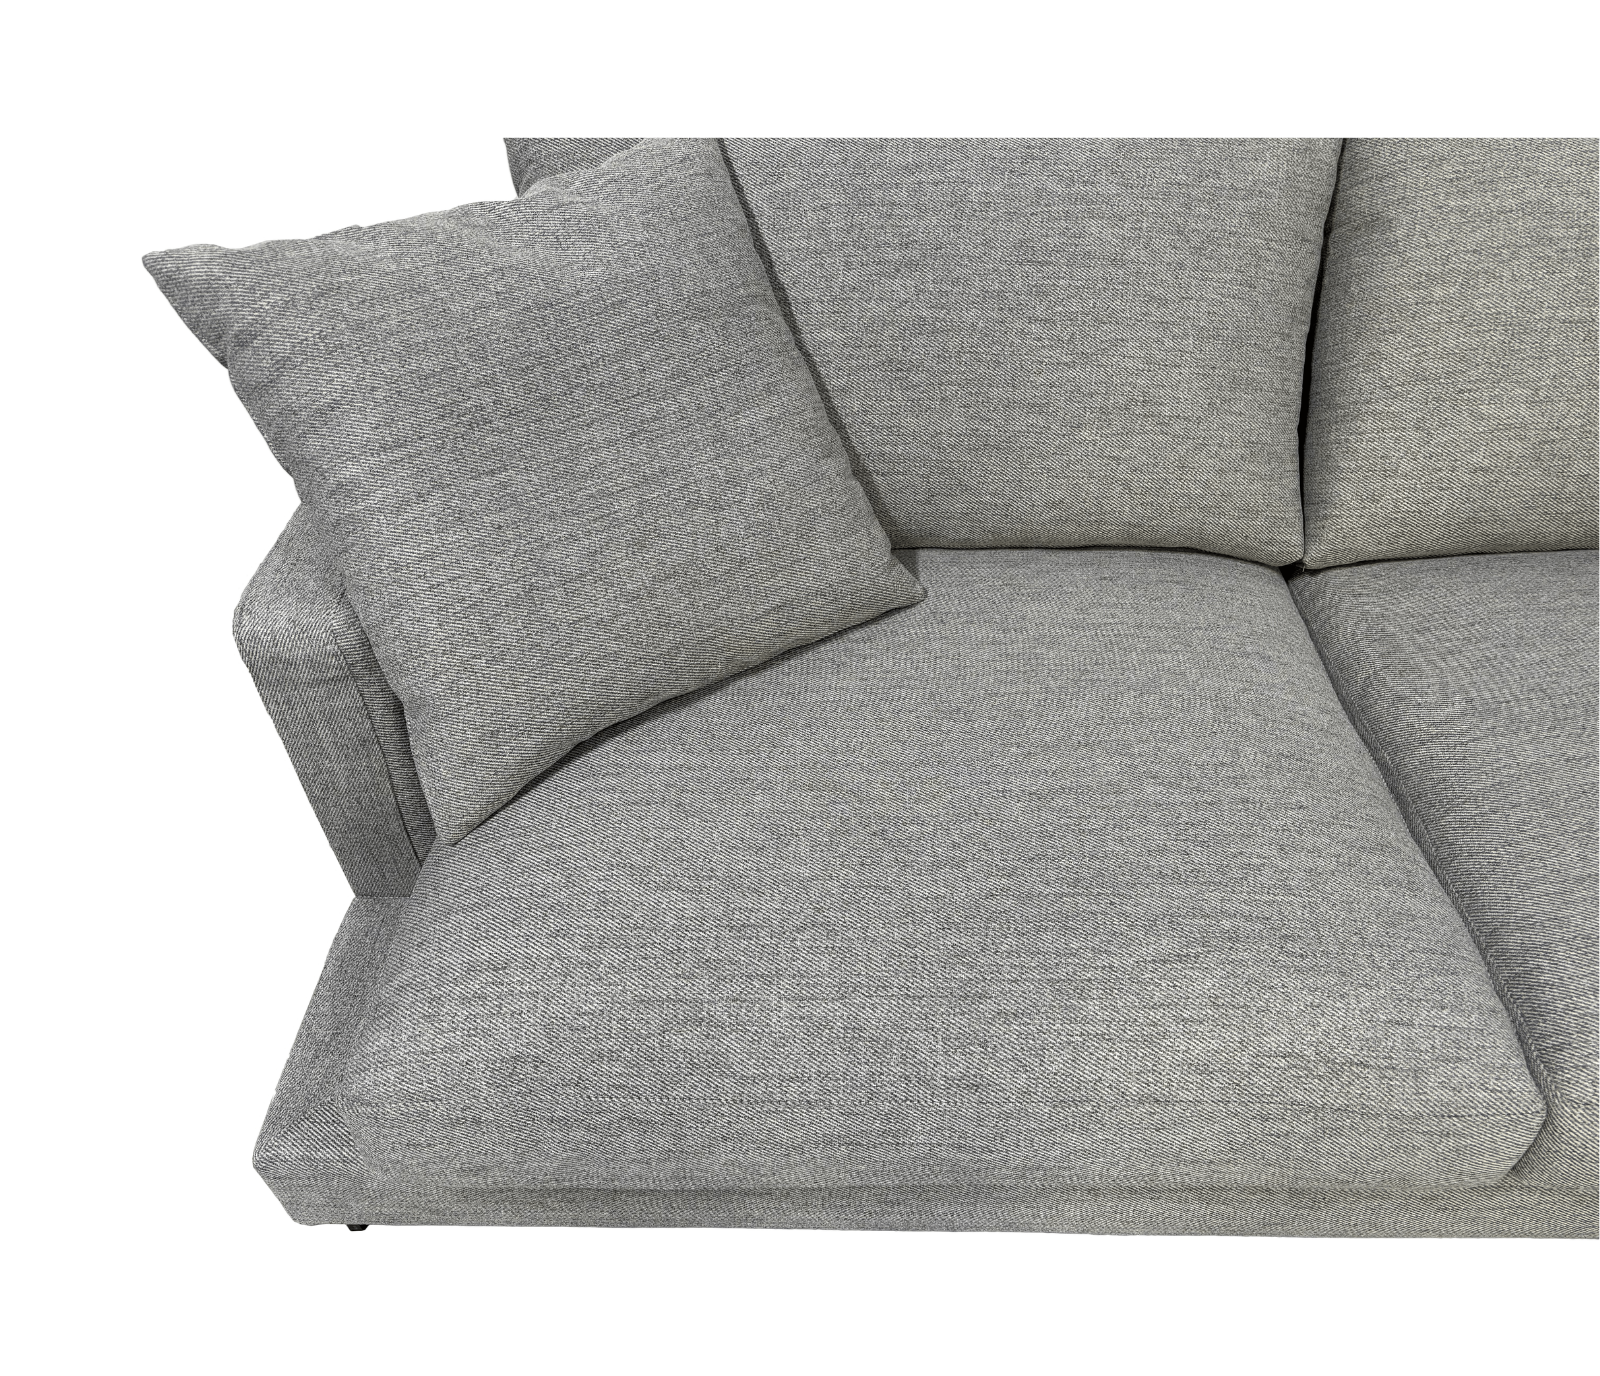 Weekender 3 Piece Sectional - Grey Fabric